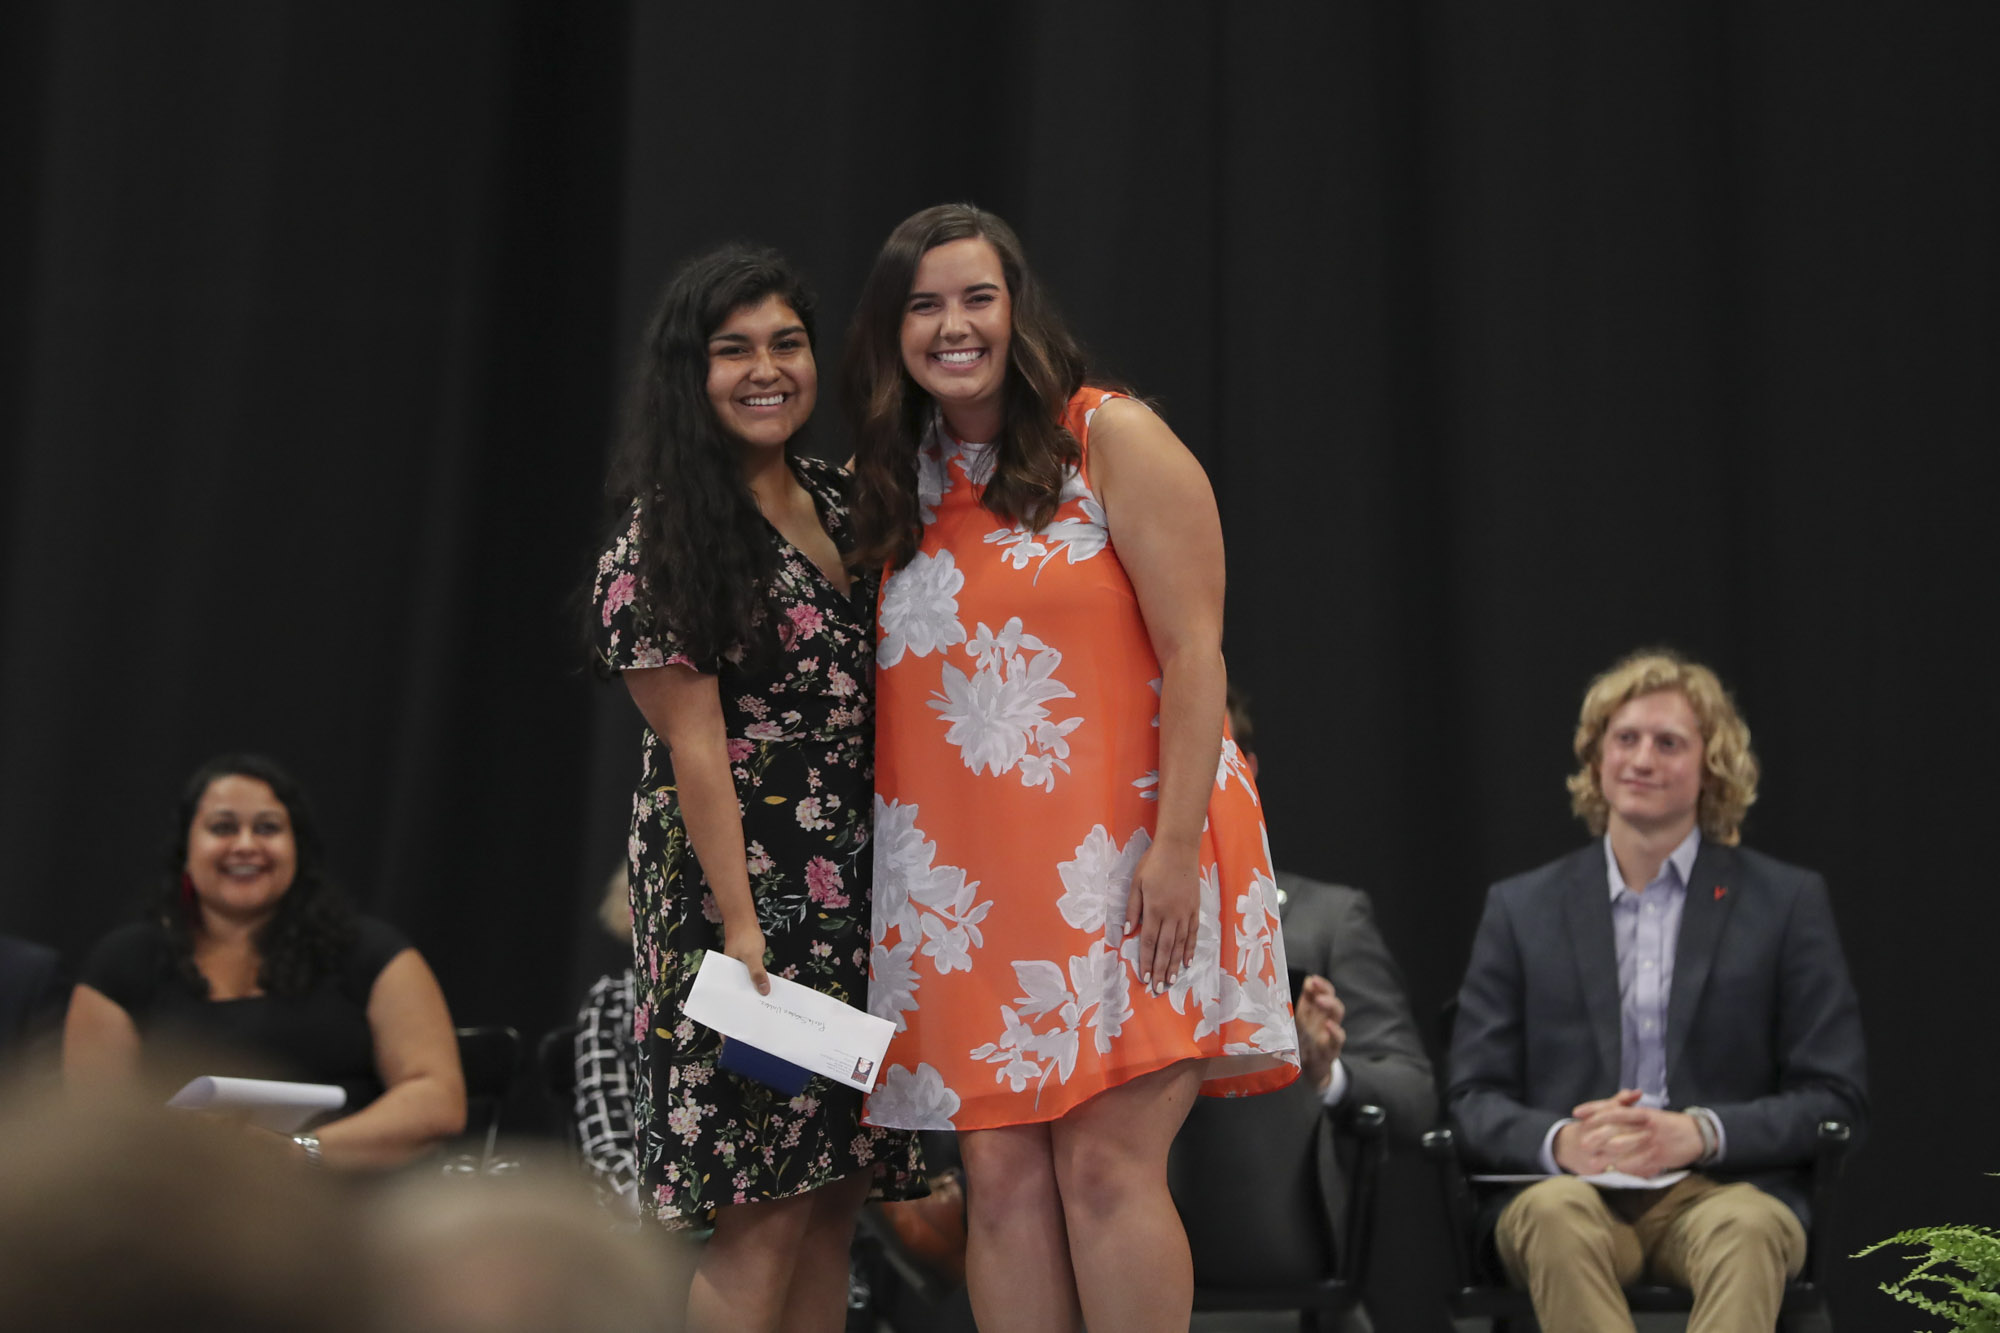 Holly Stevens, right, and Paola Sanchez Valdez, left, stand on stage smiling at the camera